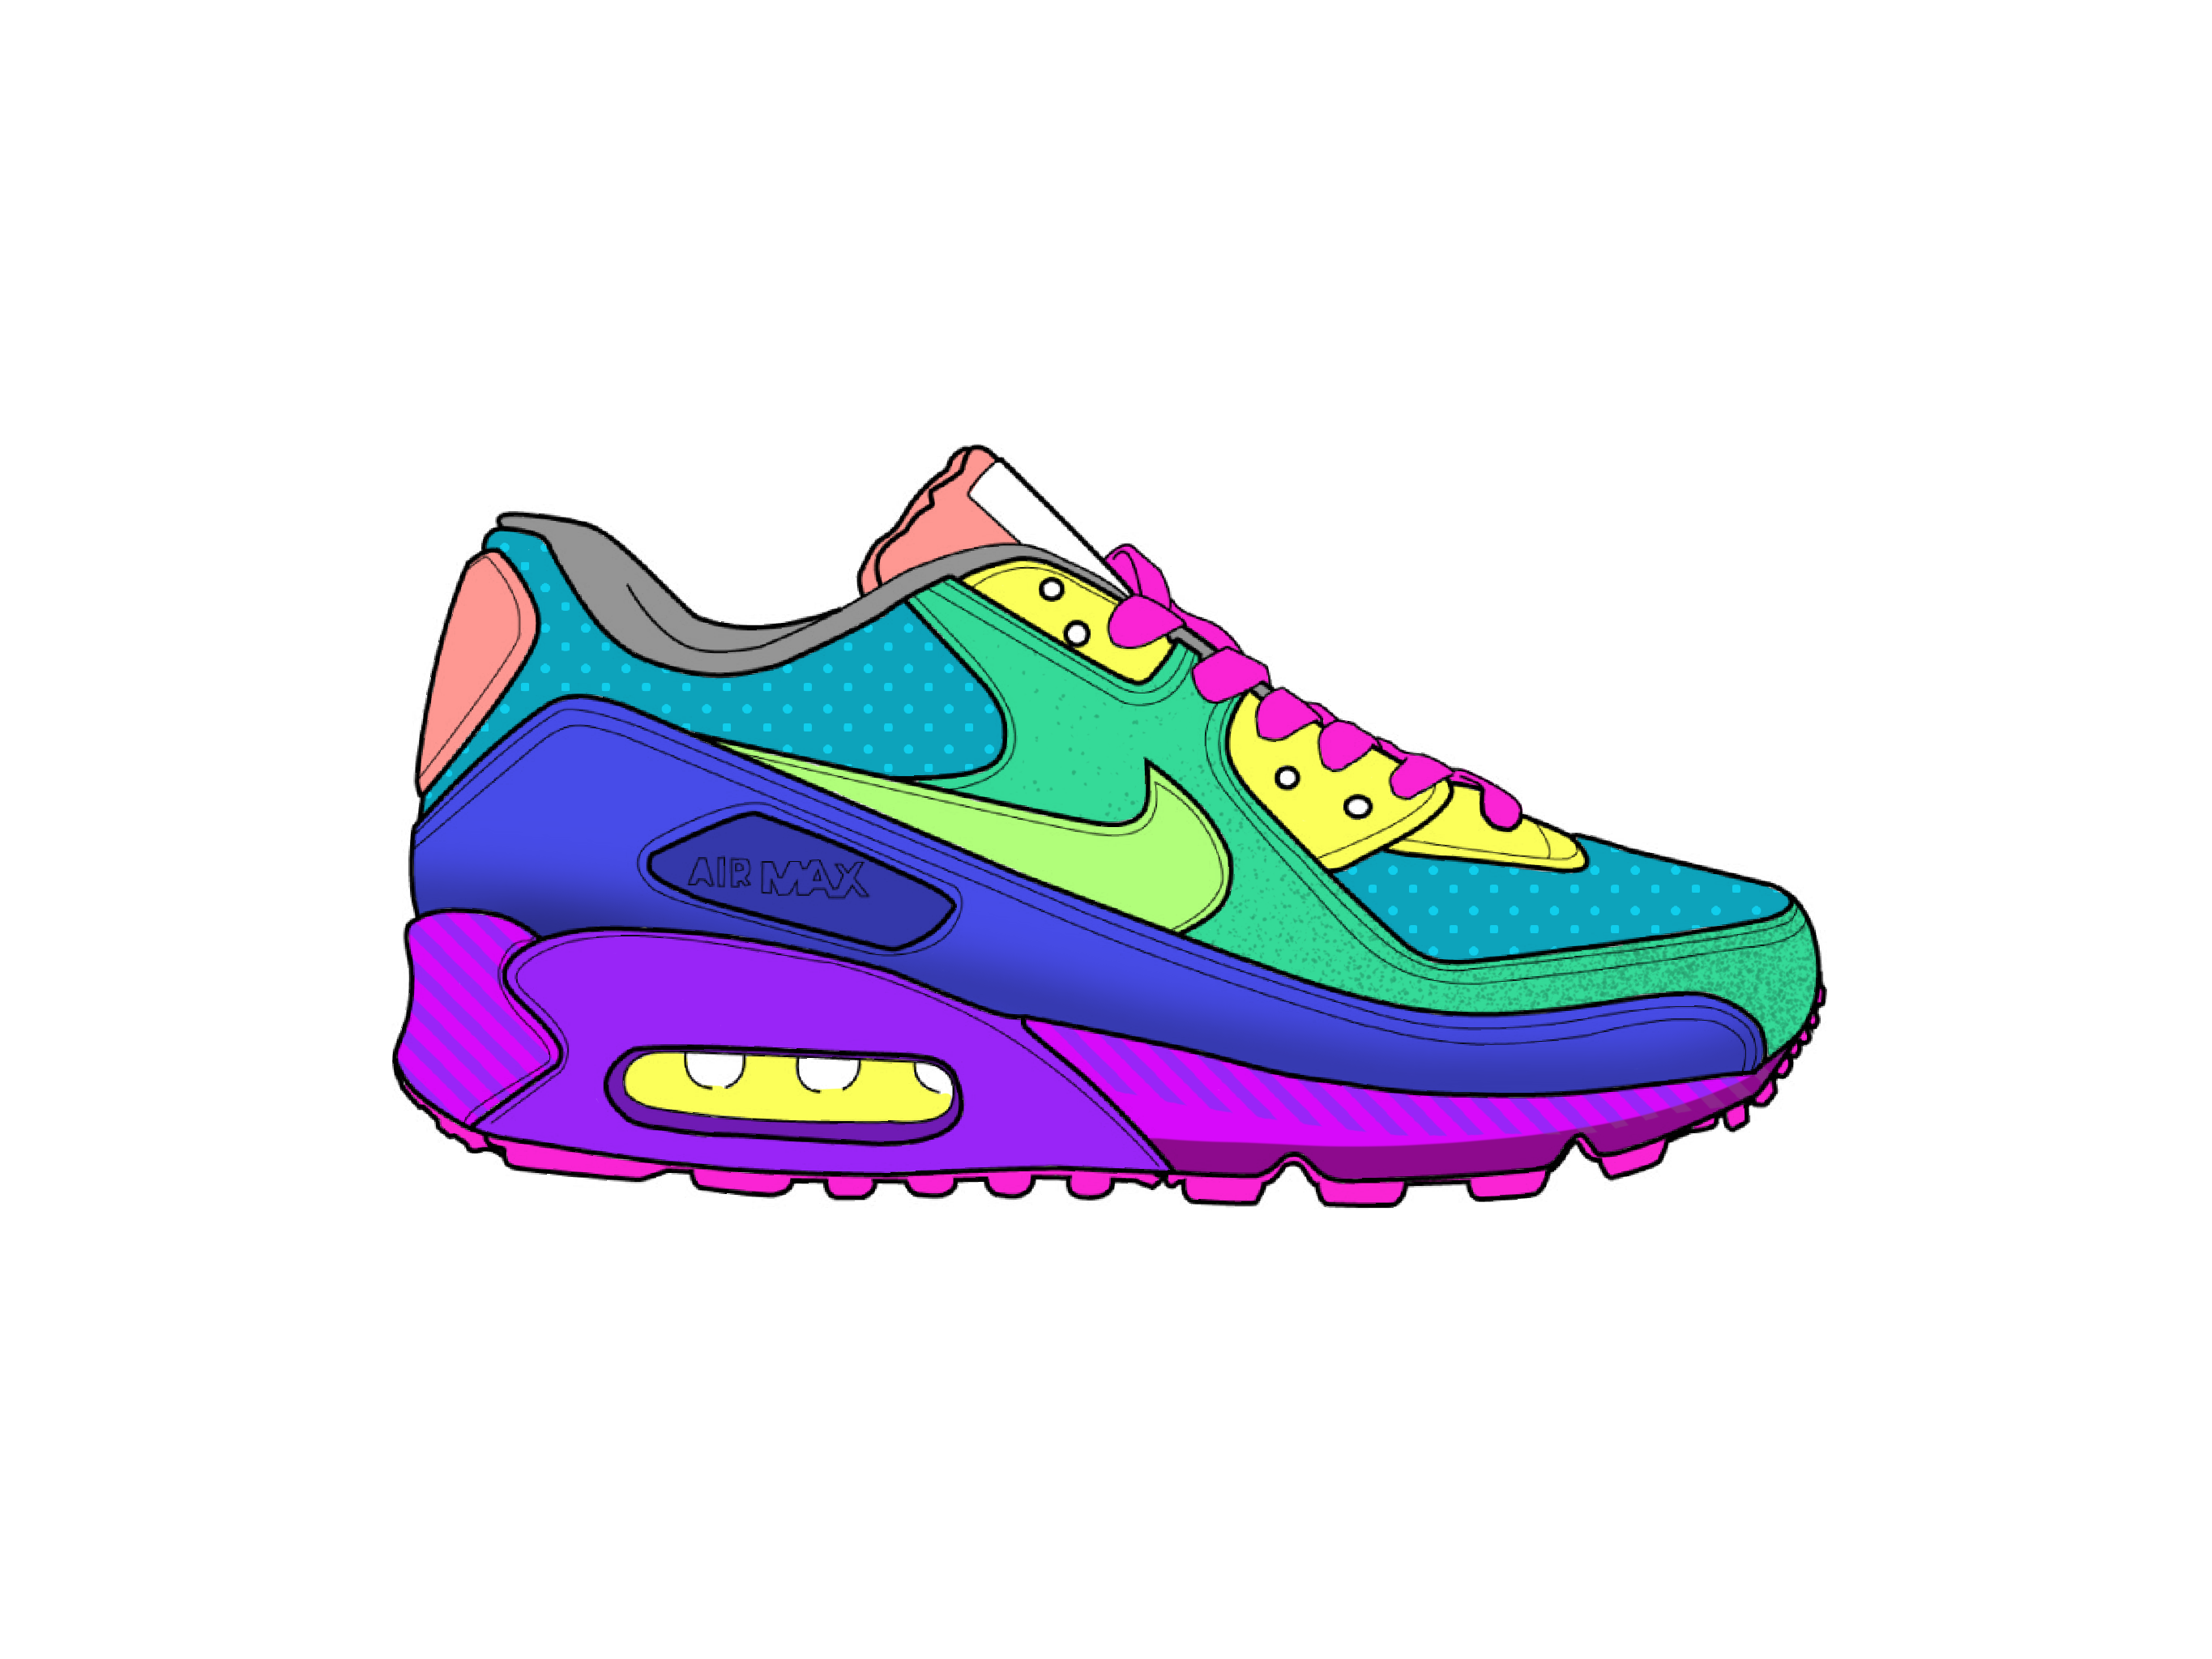 Nike Air Max - Skate by Jake Mize on 